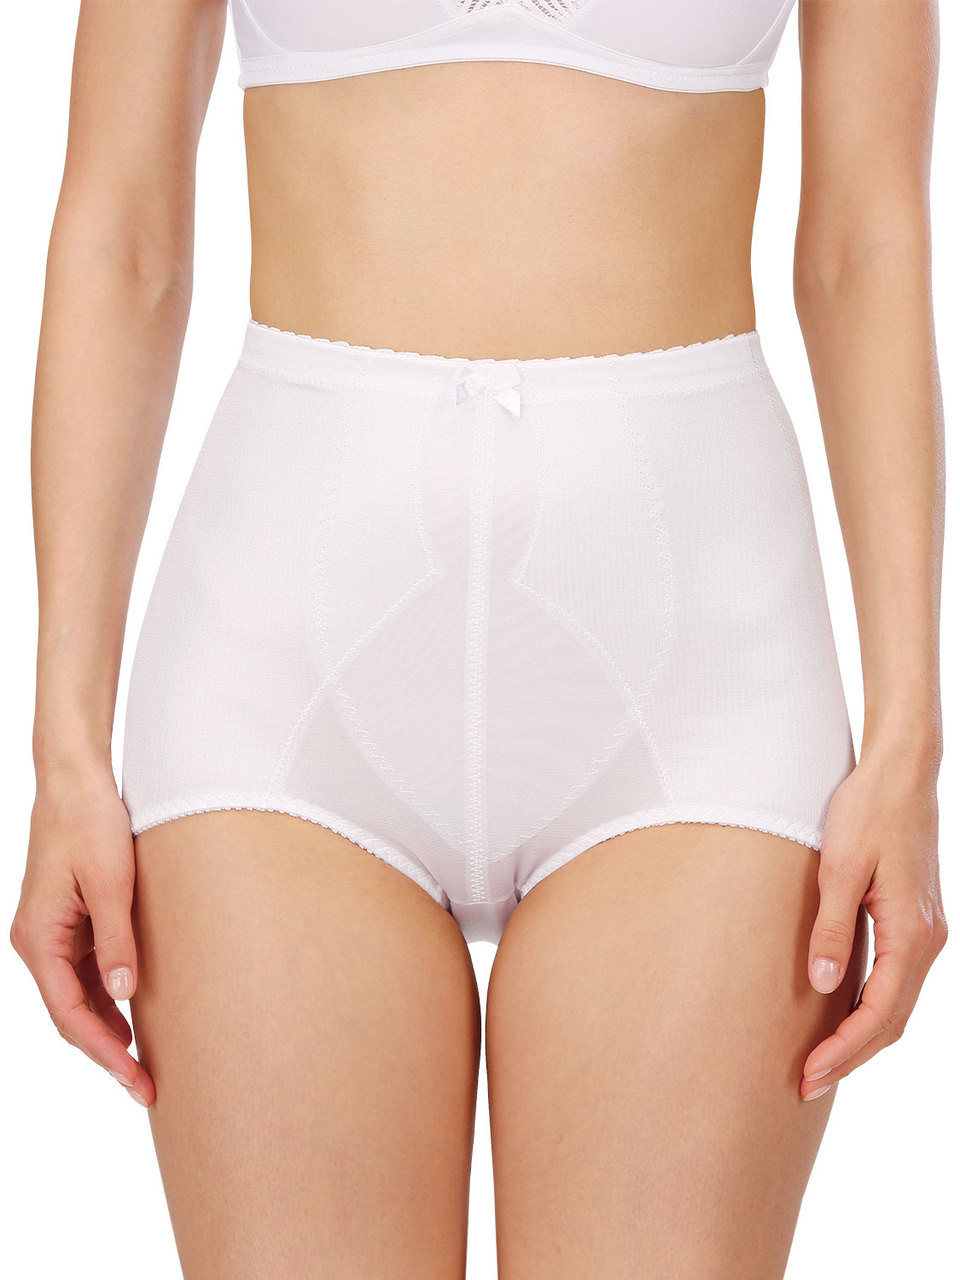 Adaptive Patented Front Fastening Underwear for Women -  Canada